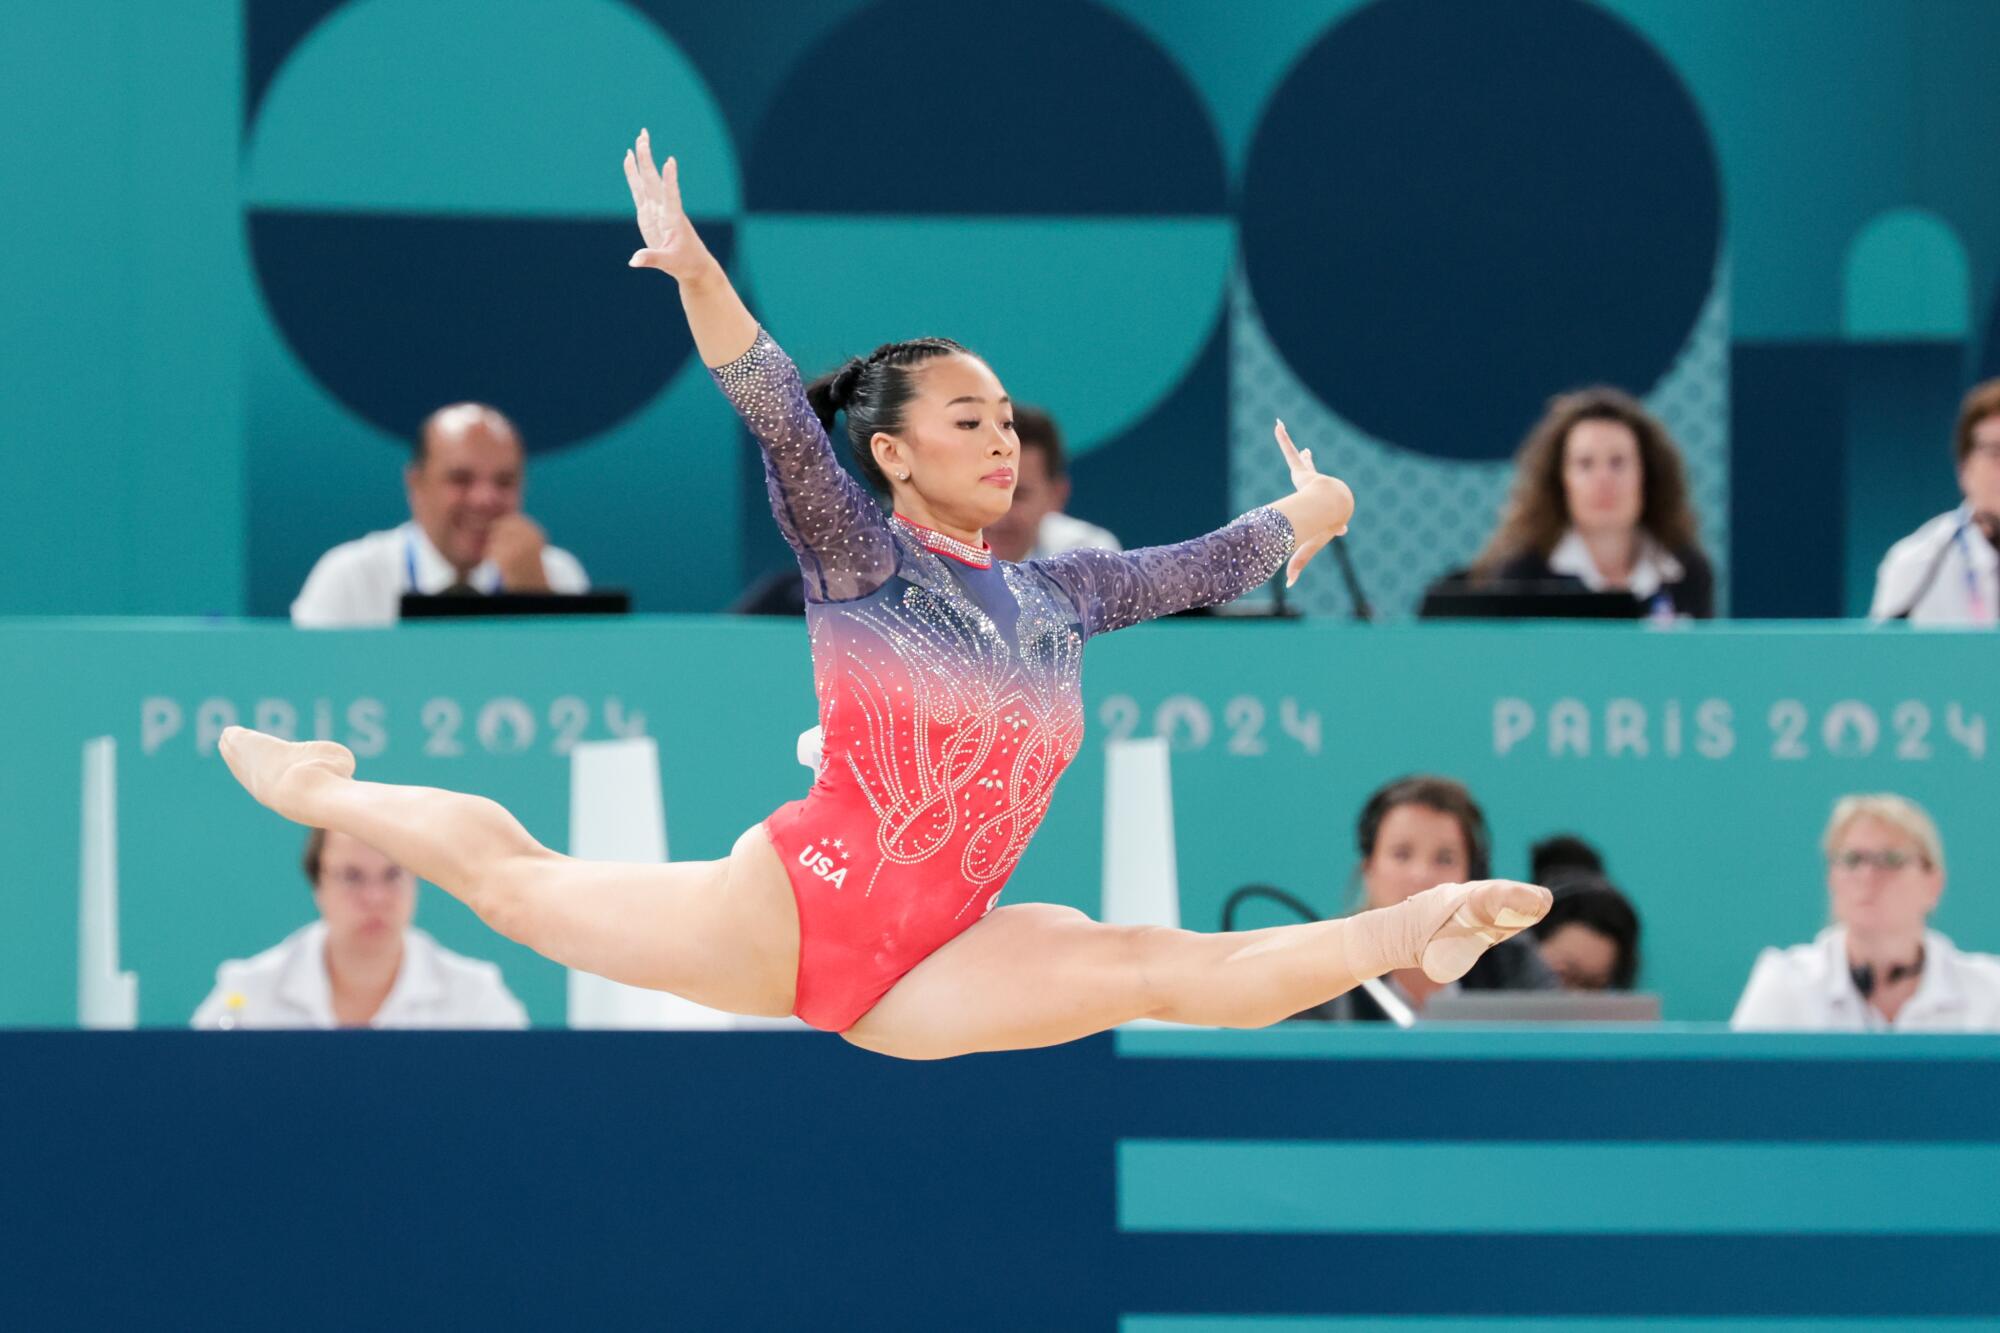 U.S. gymnast Suni Lee competes in the floor exercise in the all-around competition at the Paris Olympics.